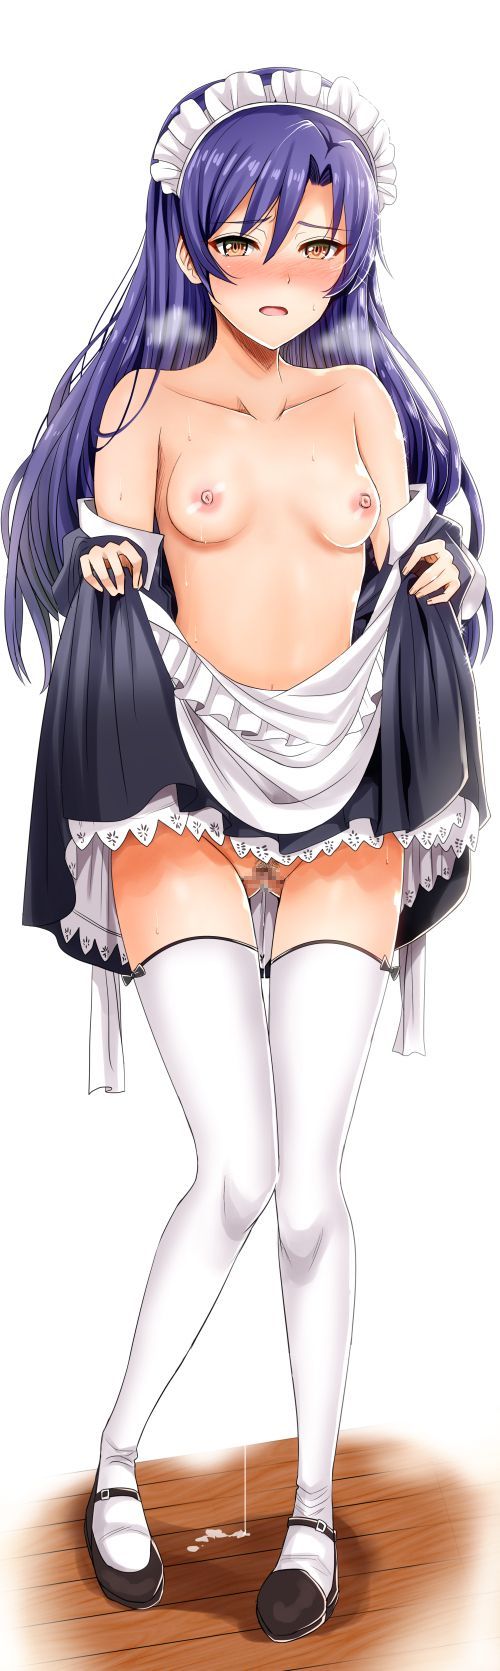 【Erotic image】Chihaya Kisaragi's character image that you want to refer to for The Idolmaster's erotic cosplay 14